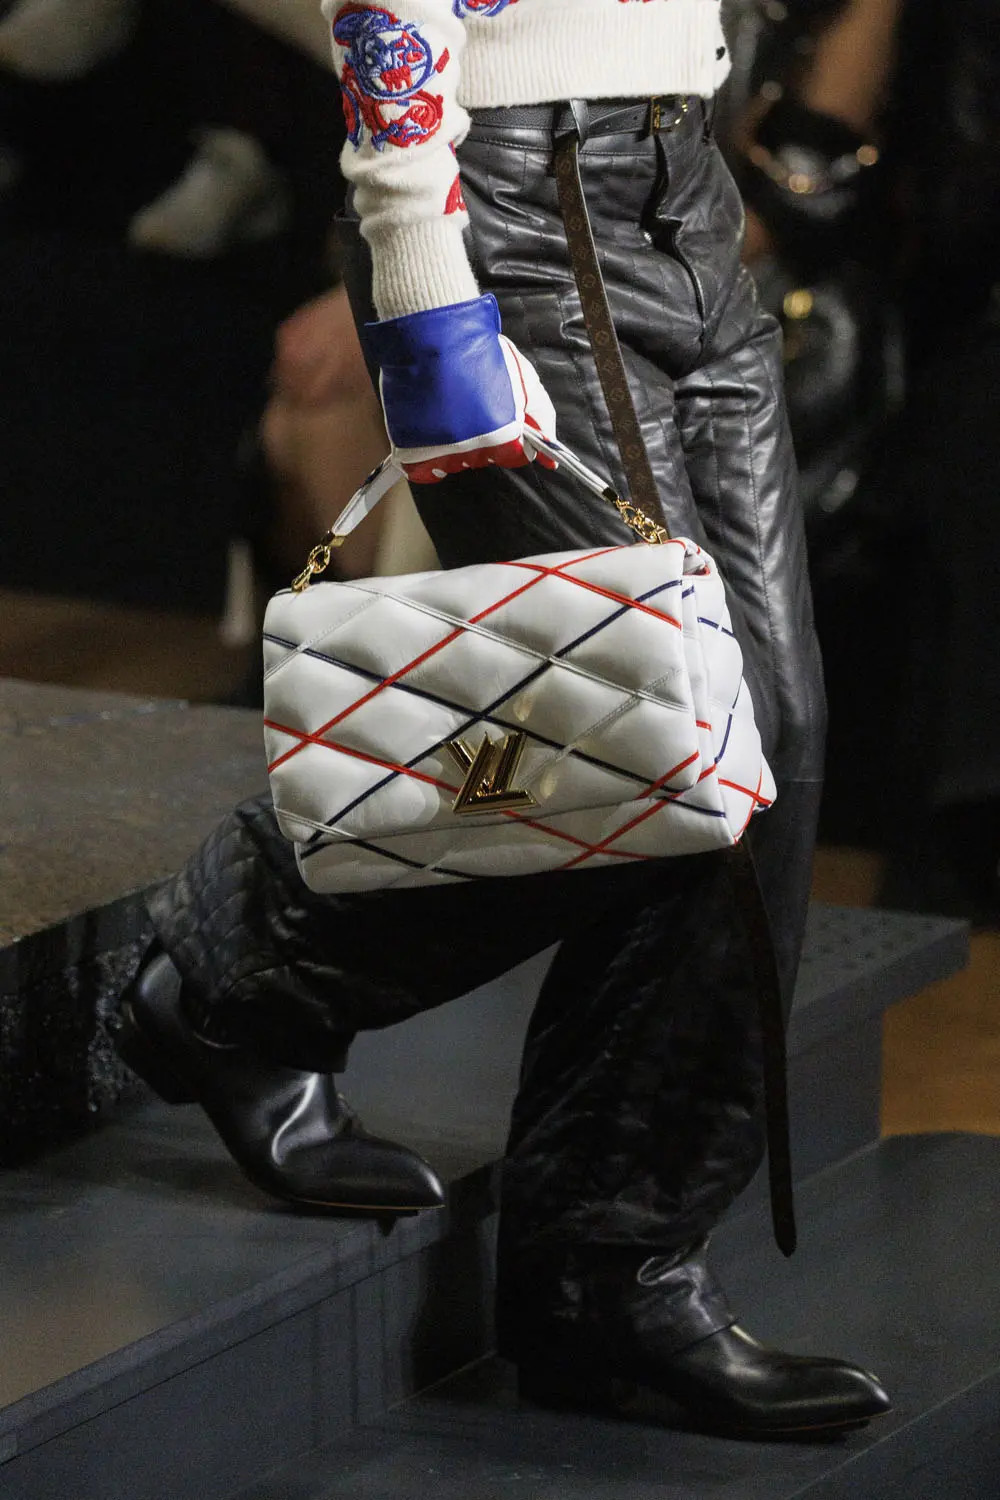 Louis Vuitton's Monogram V as a symbol of French chic and